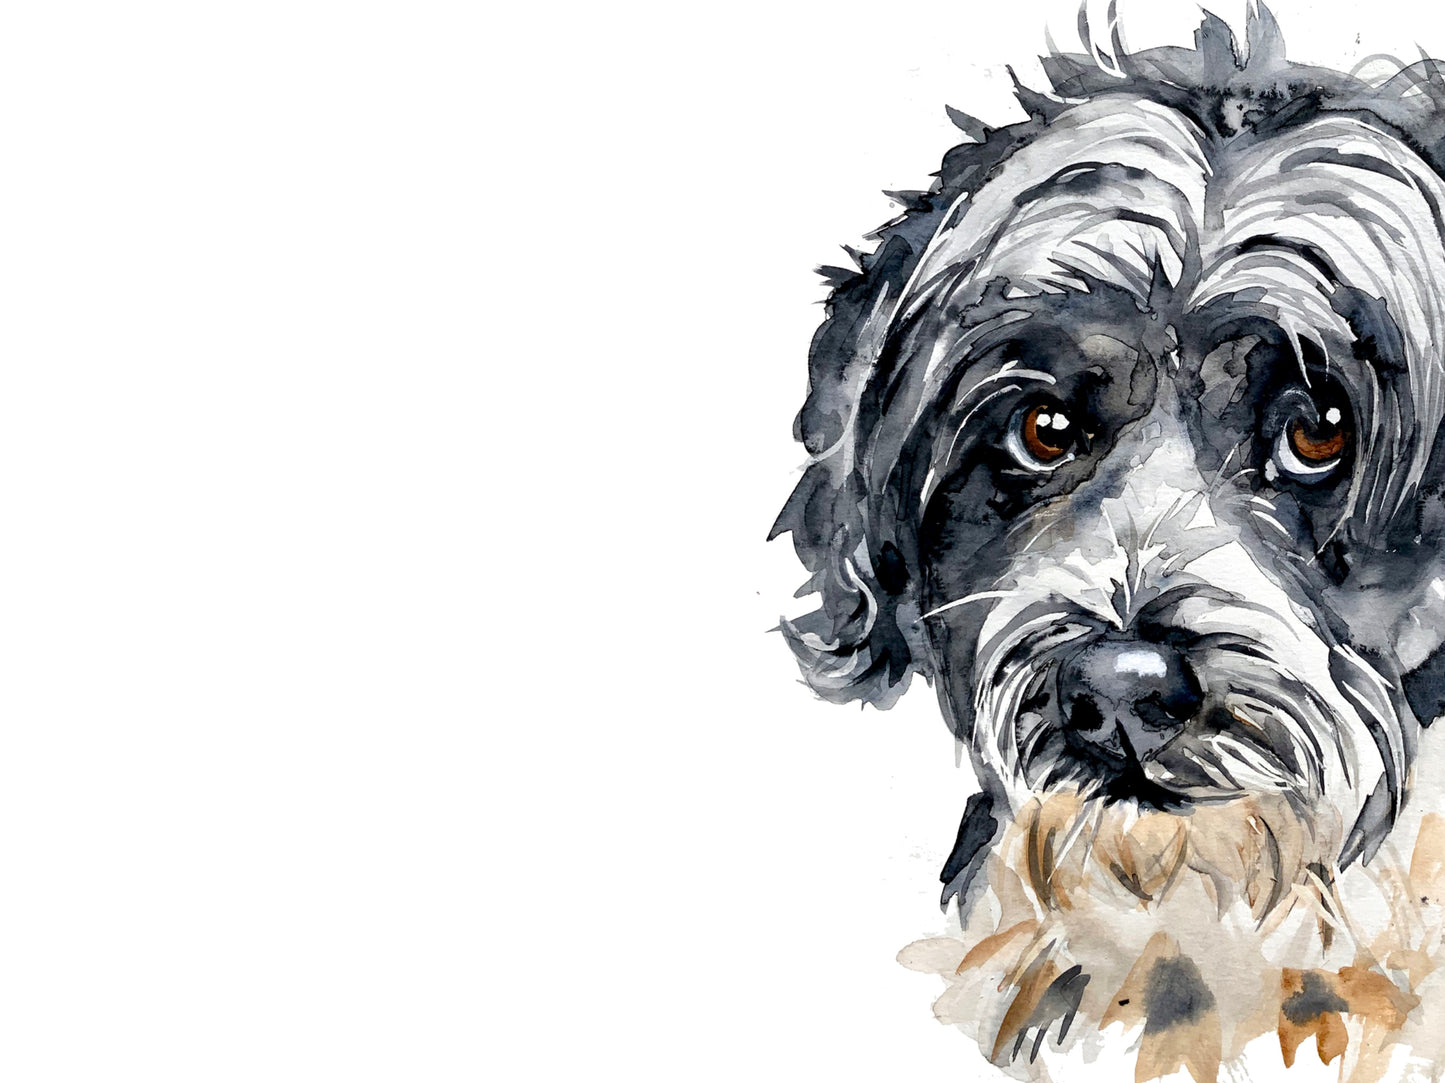 From Peanuts to Pet Portraits, unveiling the artists who’ve shaped my dog art